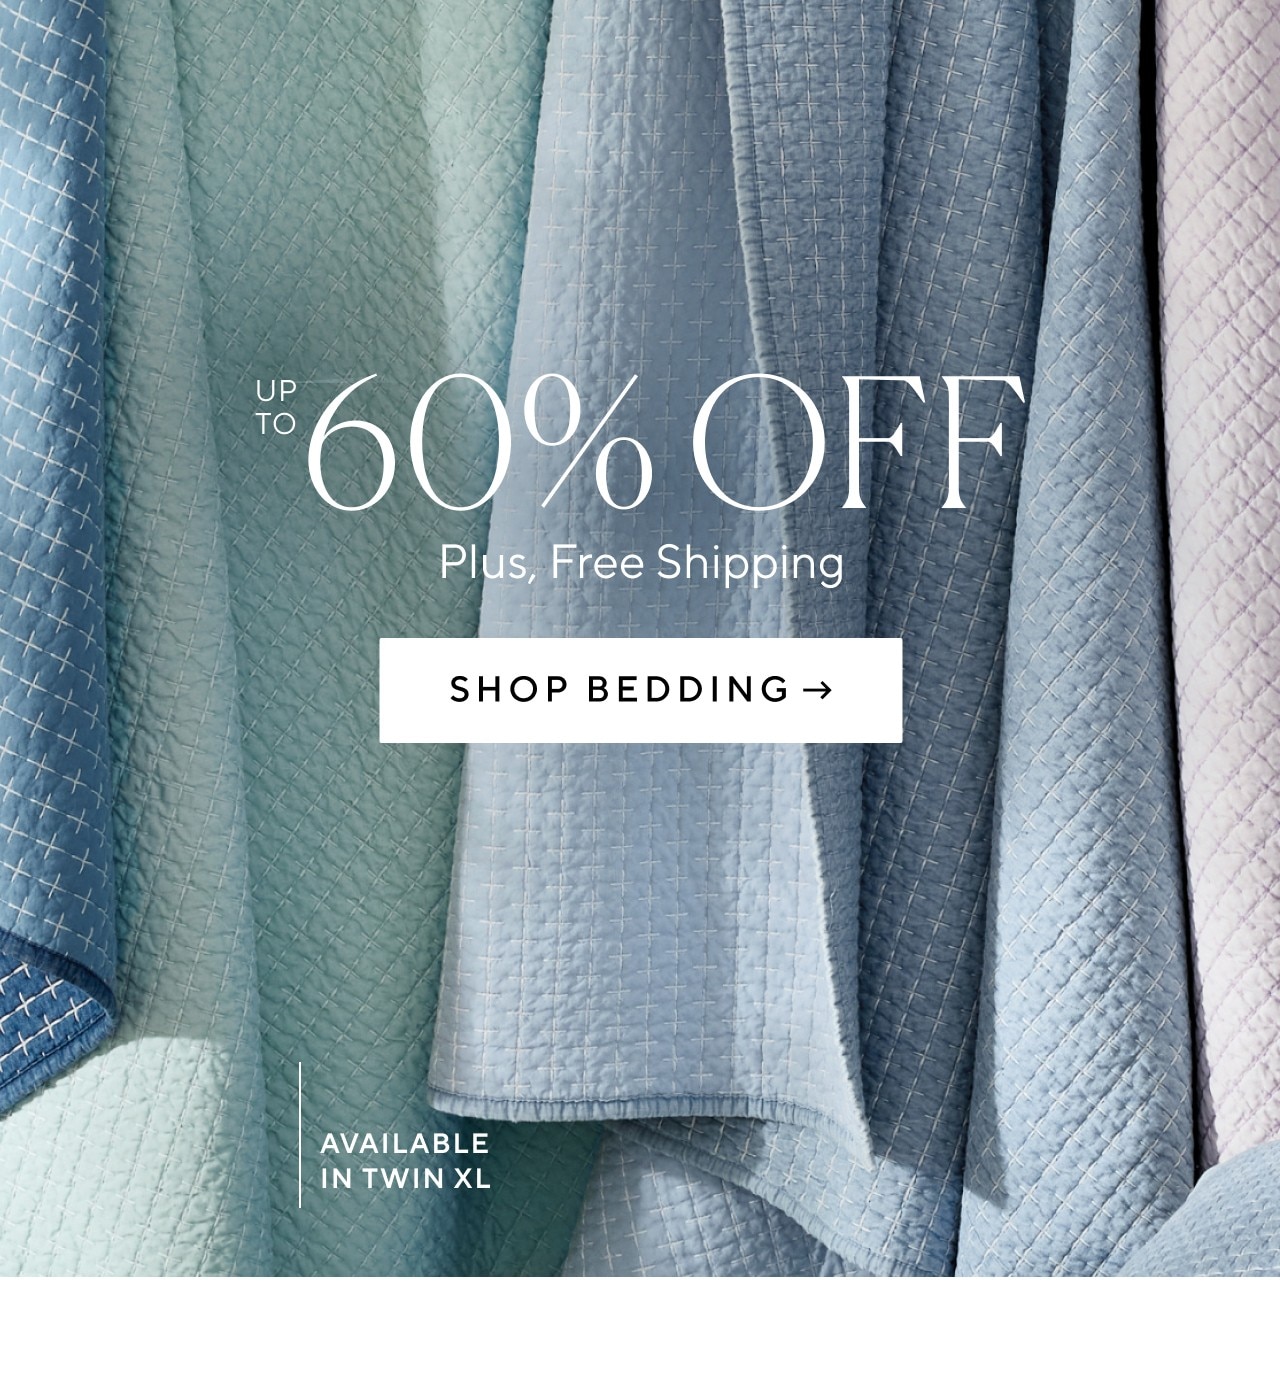 Up to 60% off plus free shipping. Shop bedding